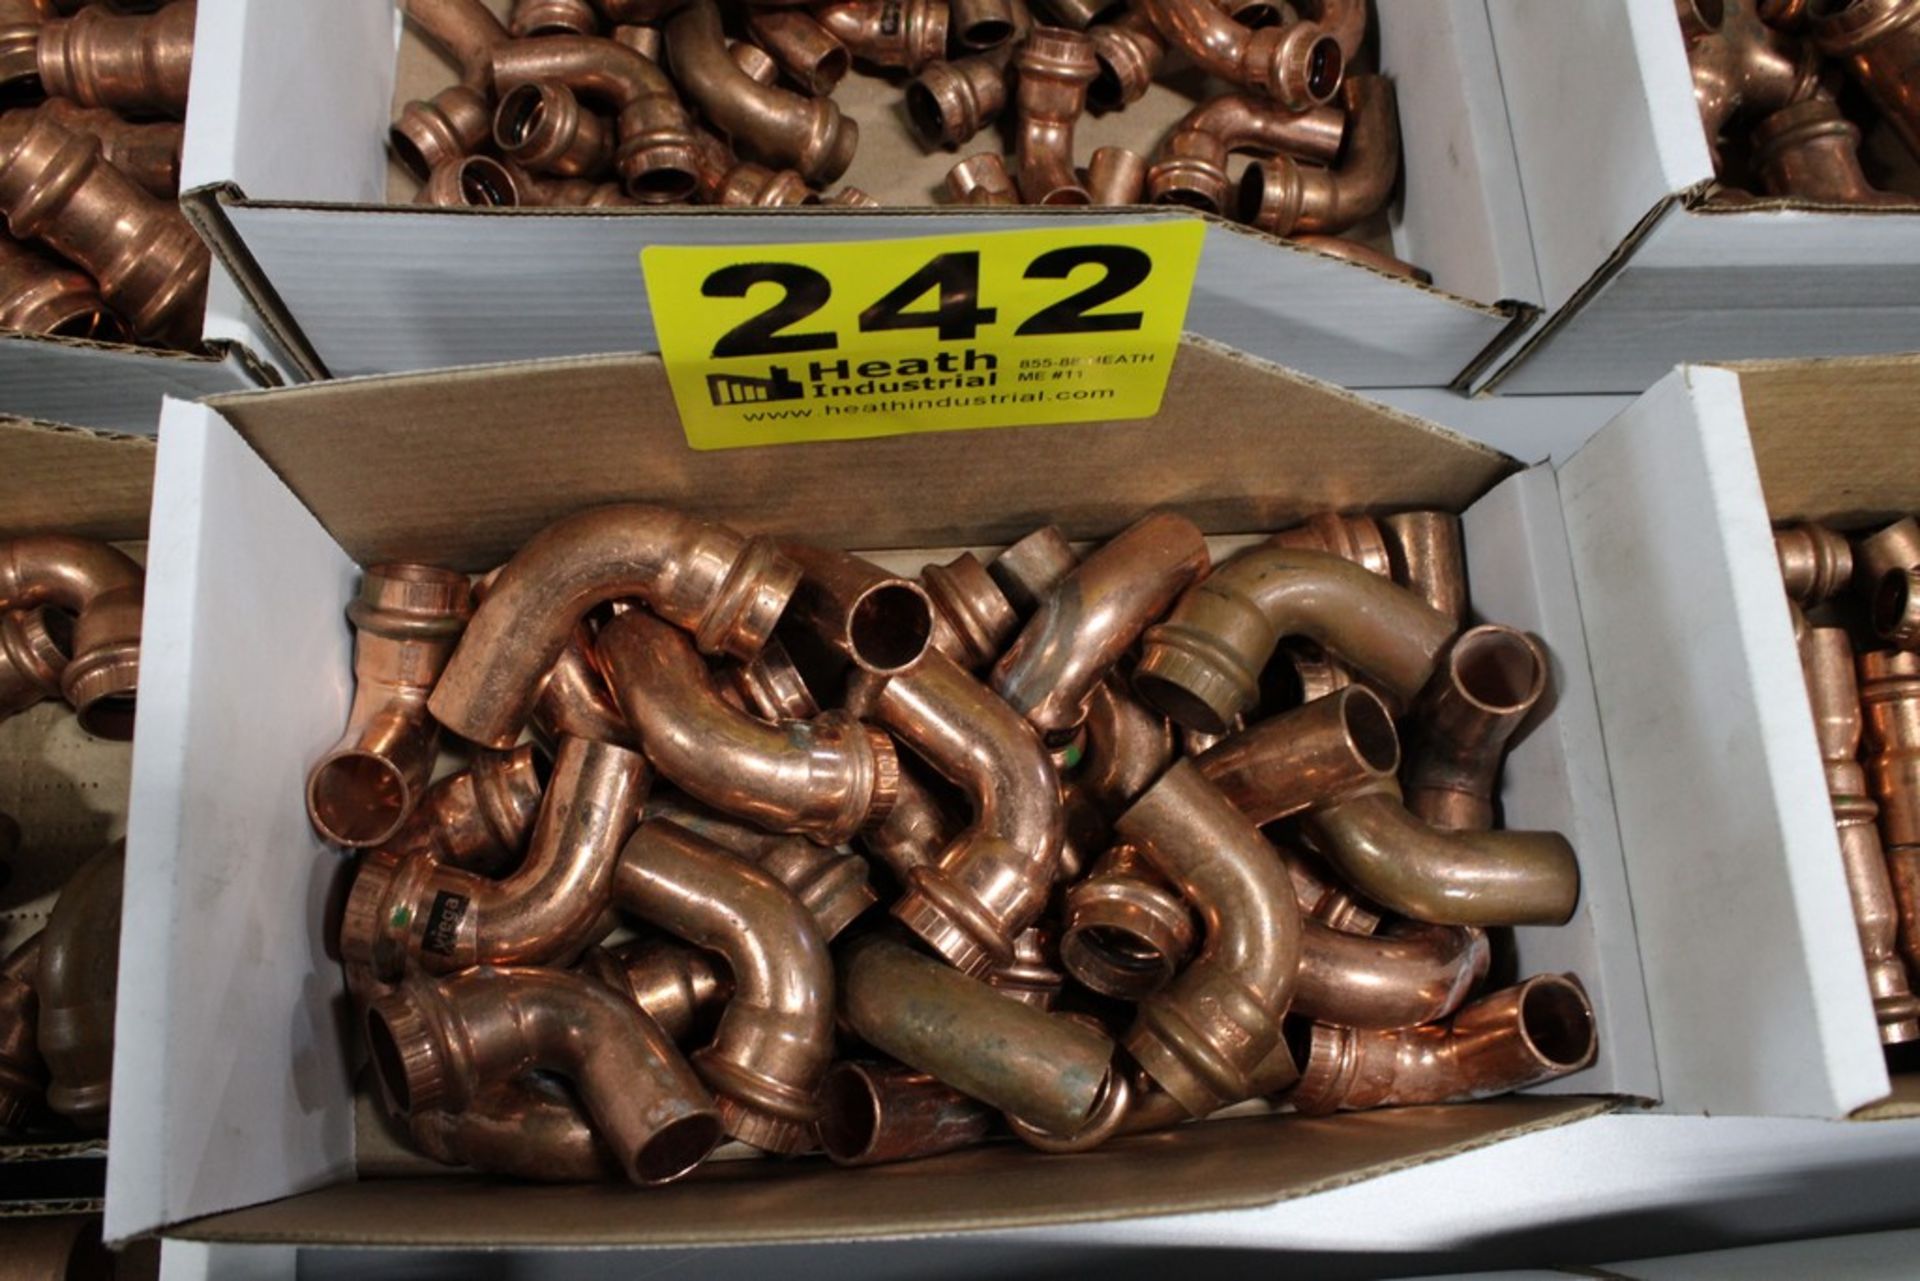 ASSORTED VIEGA COPPER PIPE FITTINGS IN BOX